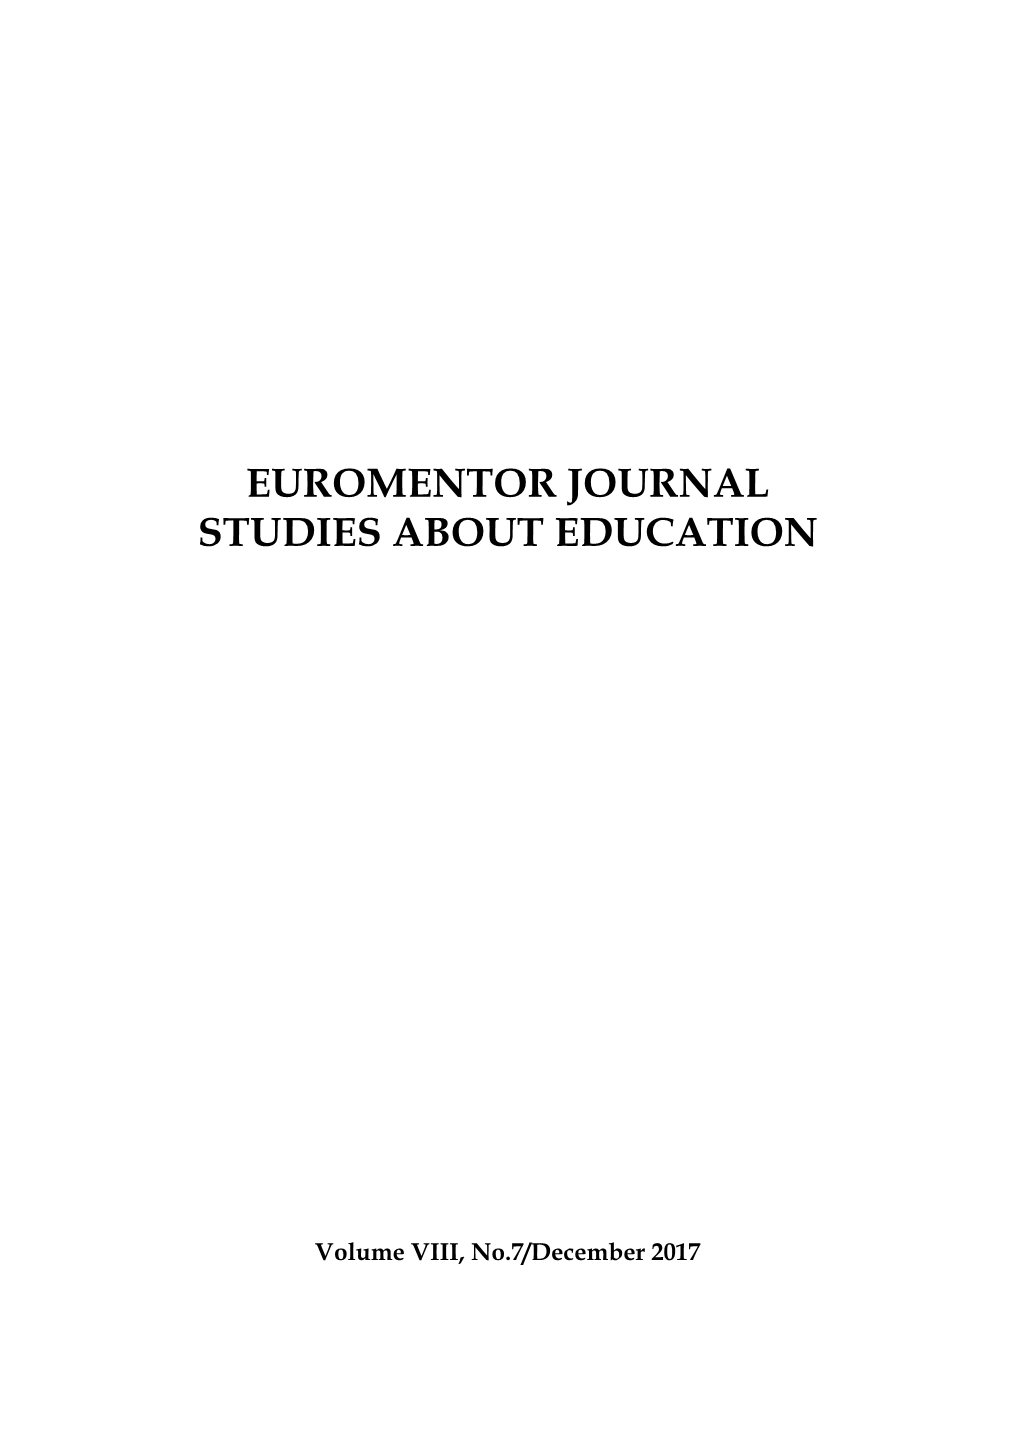 Euromentor Journal Studies About Education